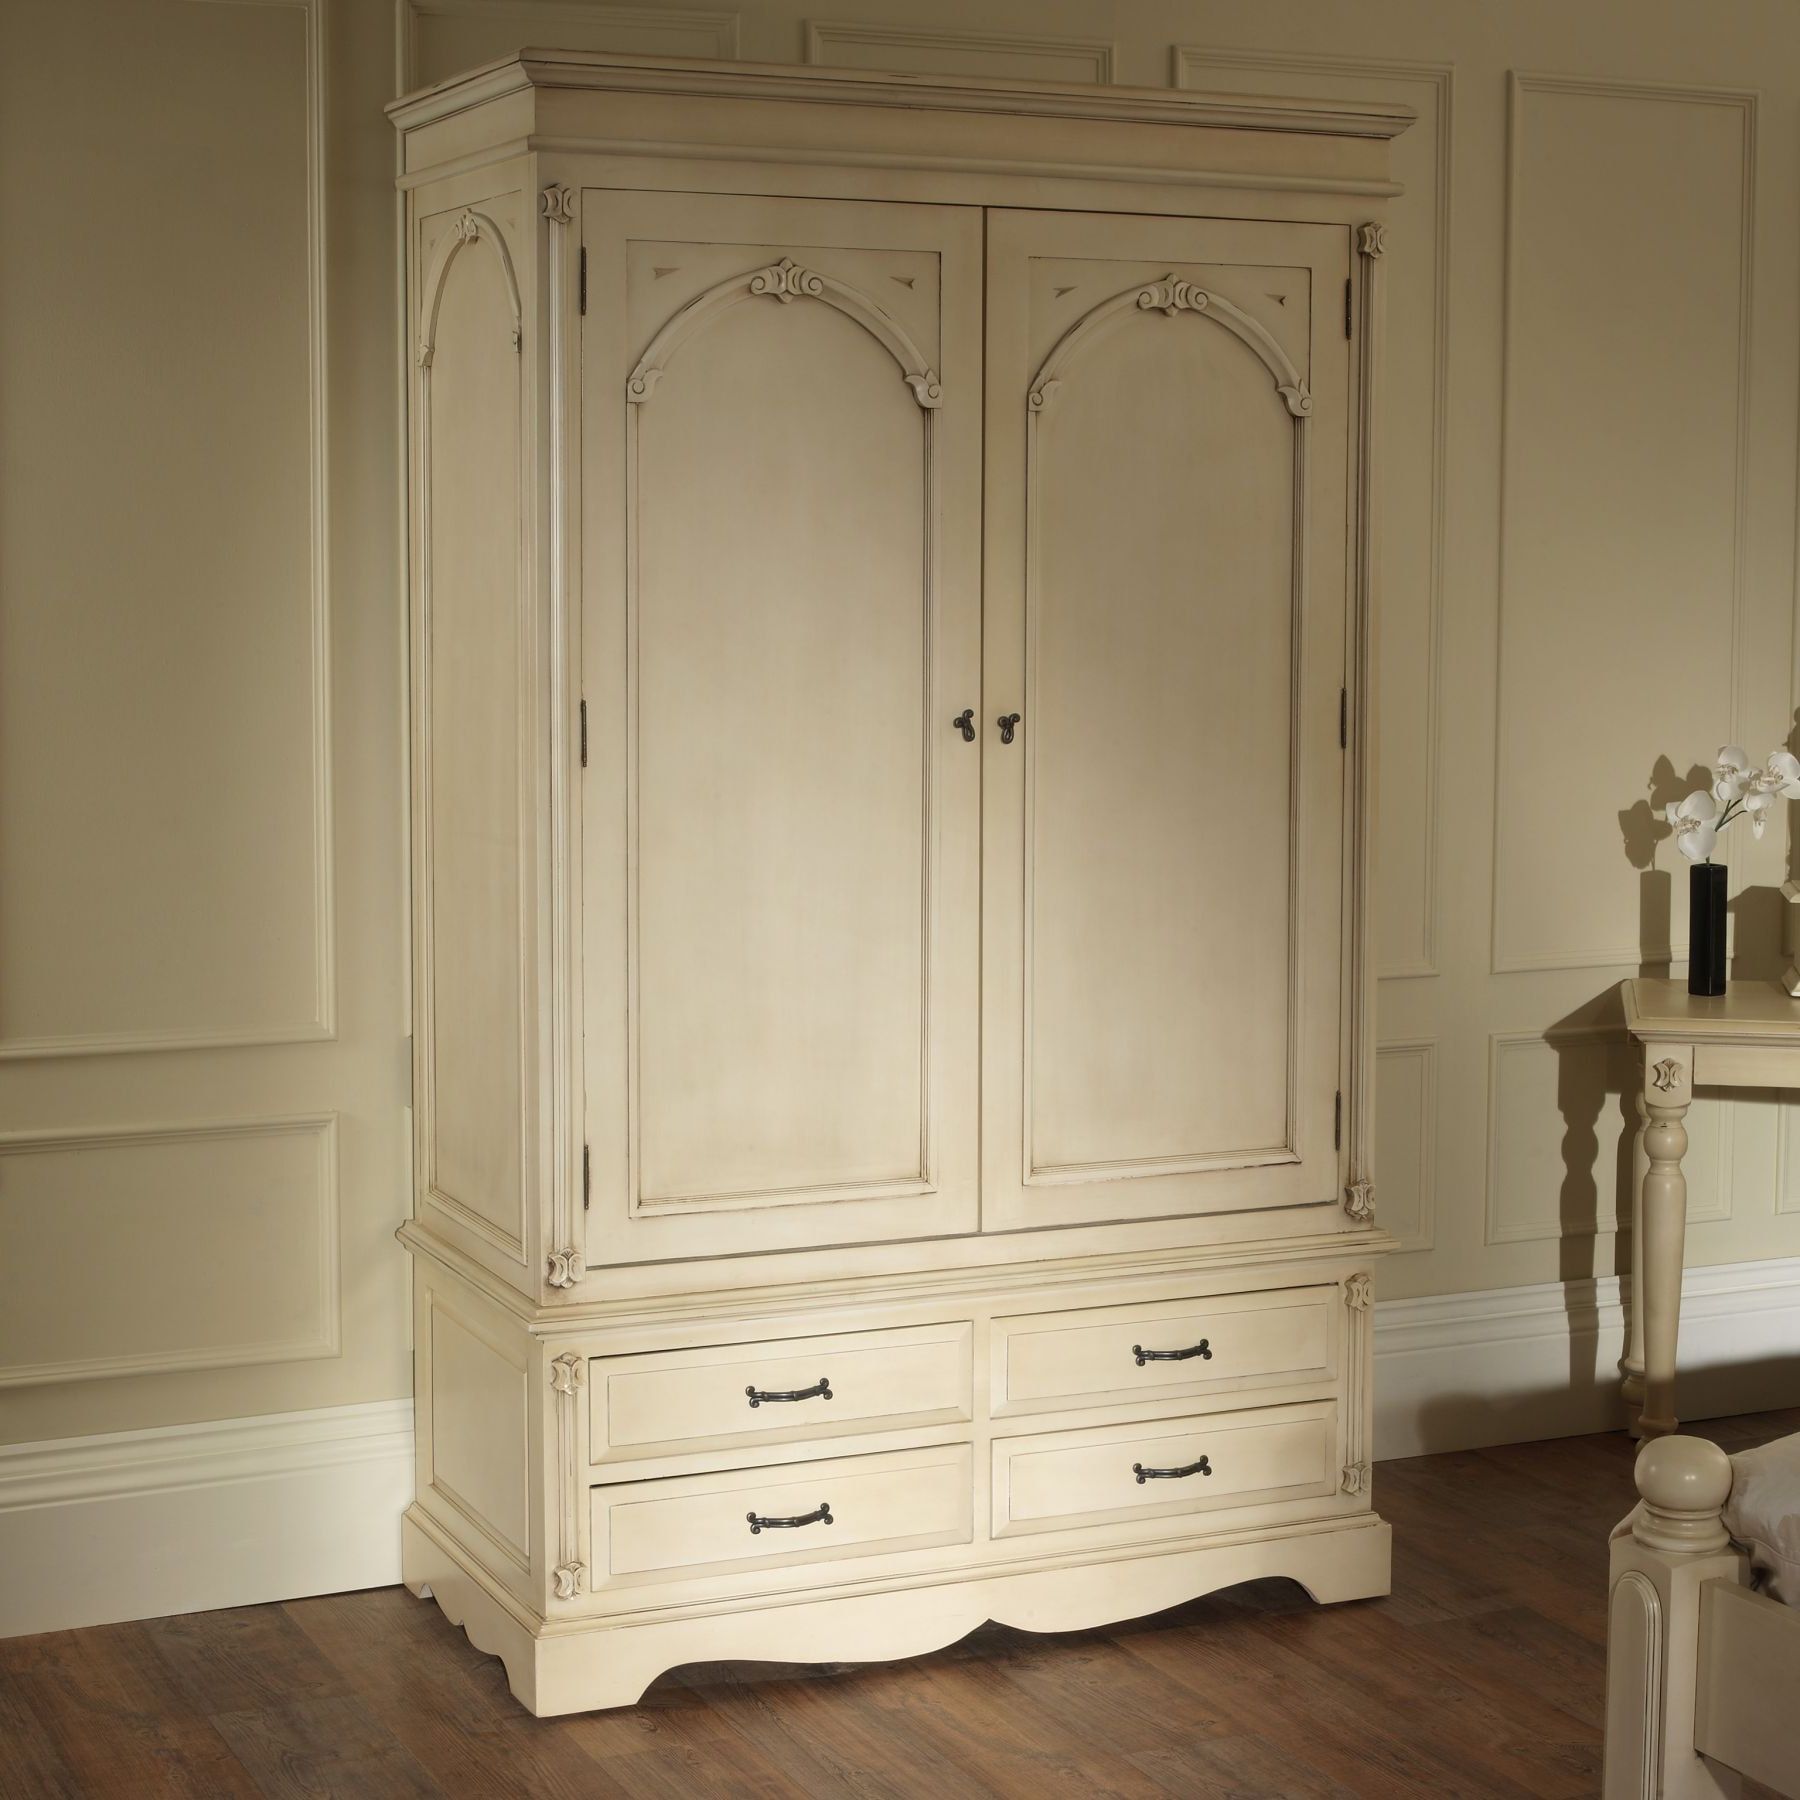 Victorian Antique French Wardrobe Works Well Alongside Our Shabby Chic  Furniture Intended For Victorian Wardrobes (View 5 of 20)